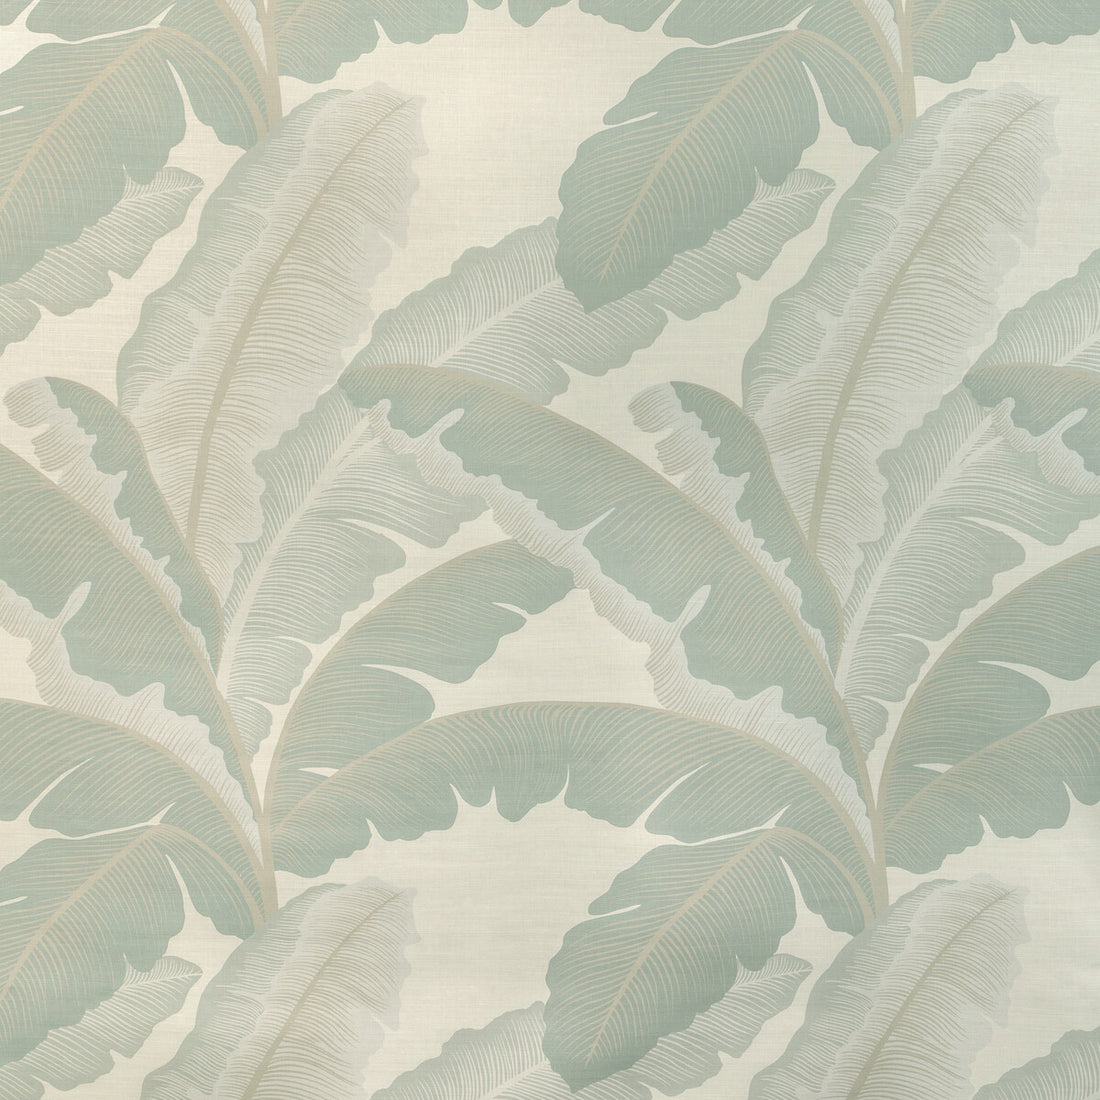 Isla Royal fabric in mist color - pattern ISLA ROYAL.11.0 - by Kravet Couture in the Casa Botanica collection